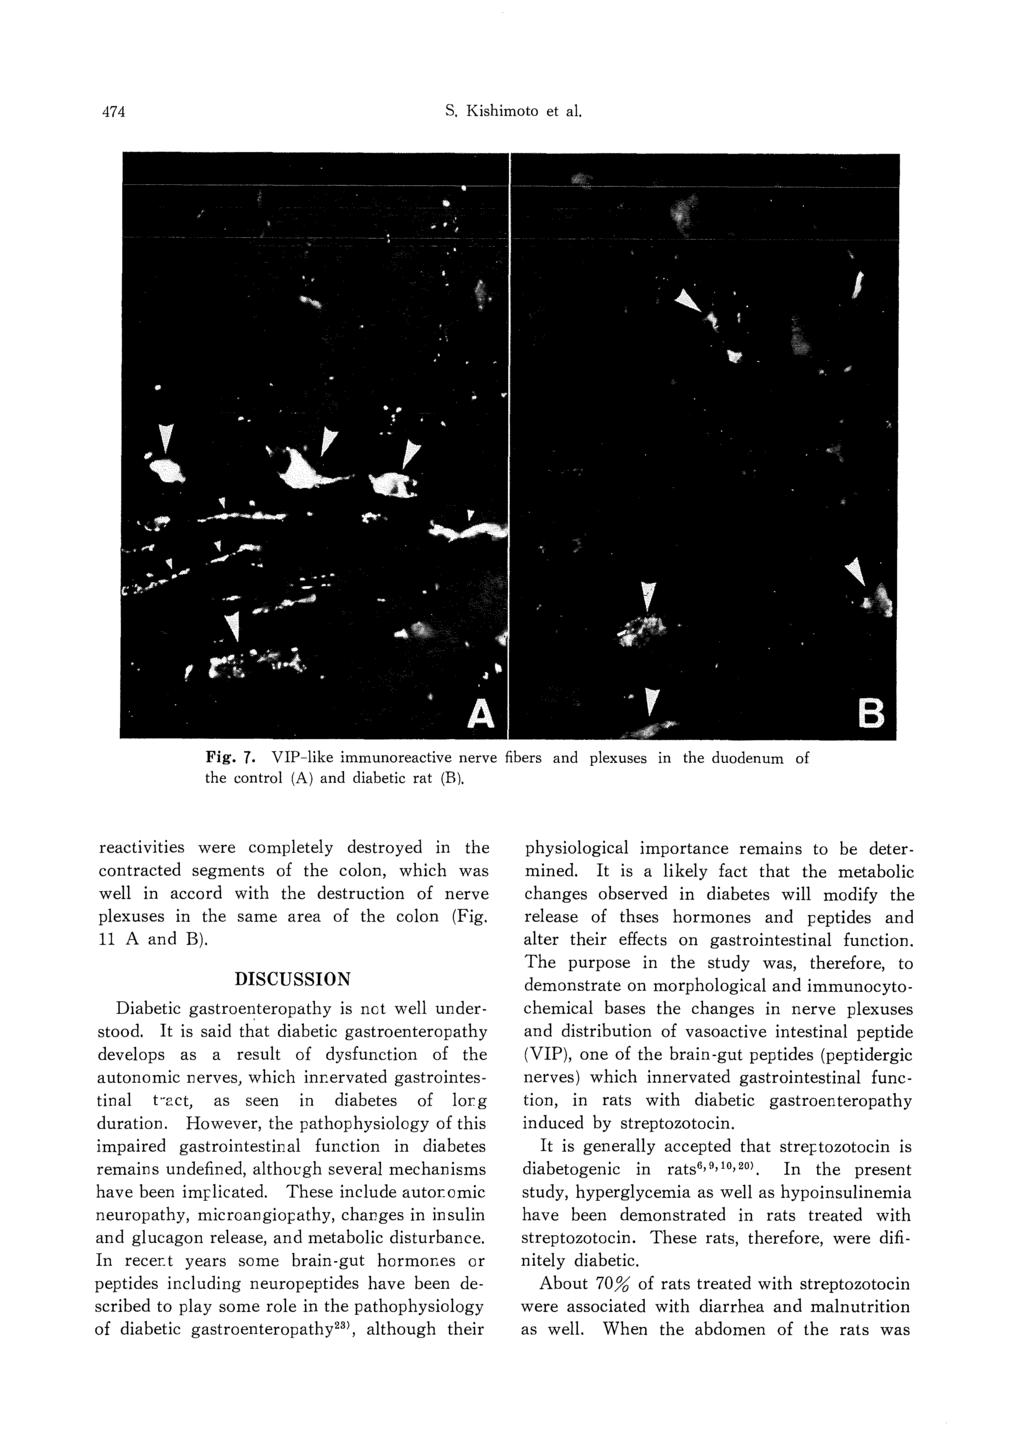 474 S. Kishimoto et al. Fig. 7. VIP-like immunoreactive nerve fibers and plexuses in the duodenum of the control (A) and diabetic rat (B).